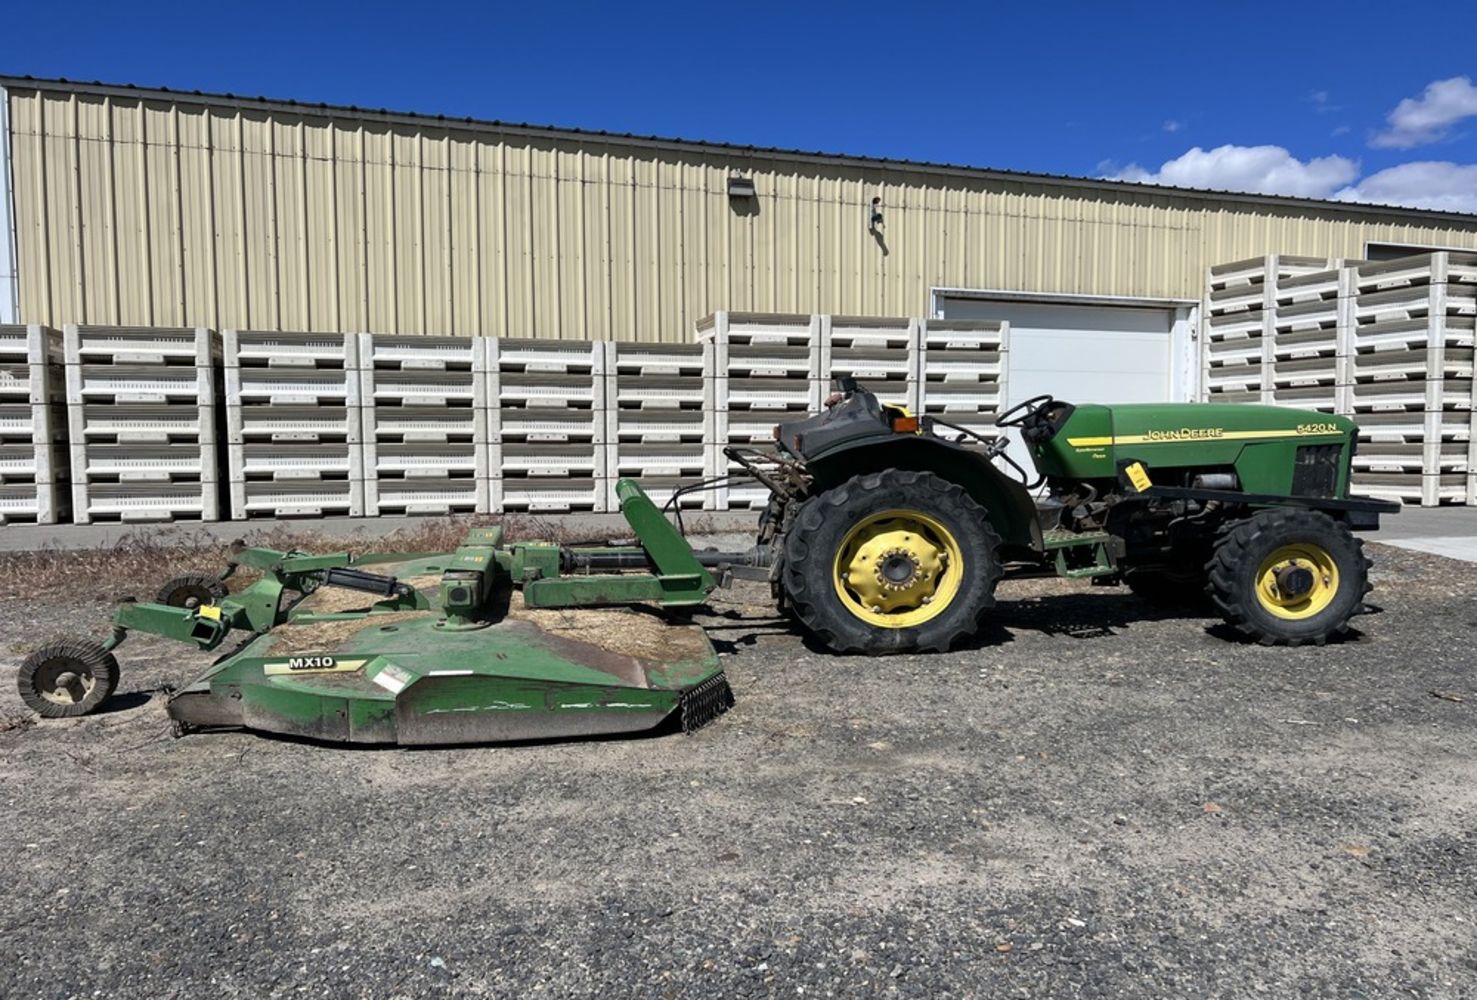 Complete Wine Processing & Agricultural Equipment Sale